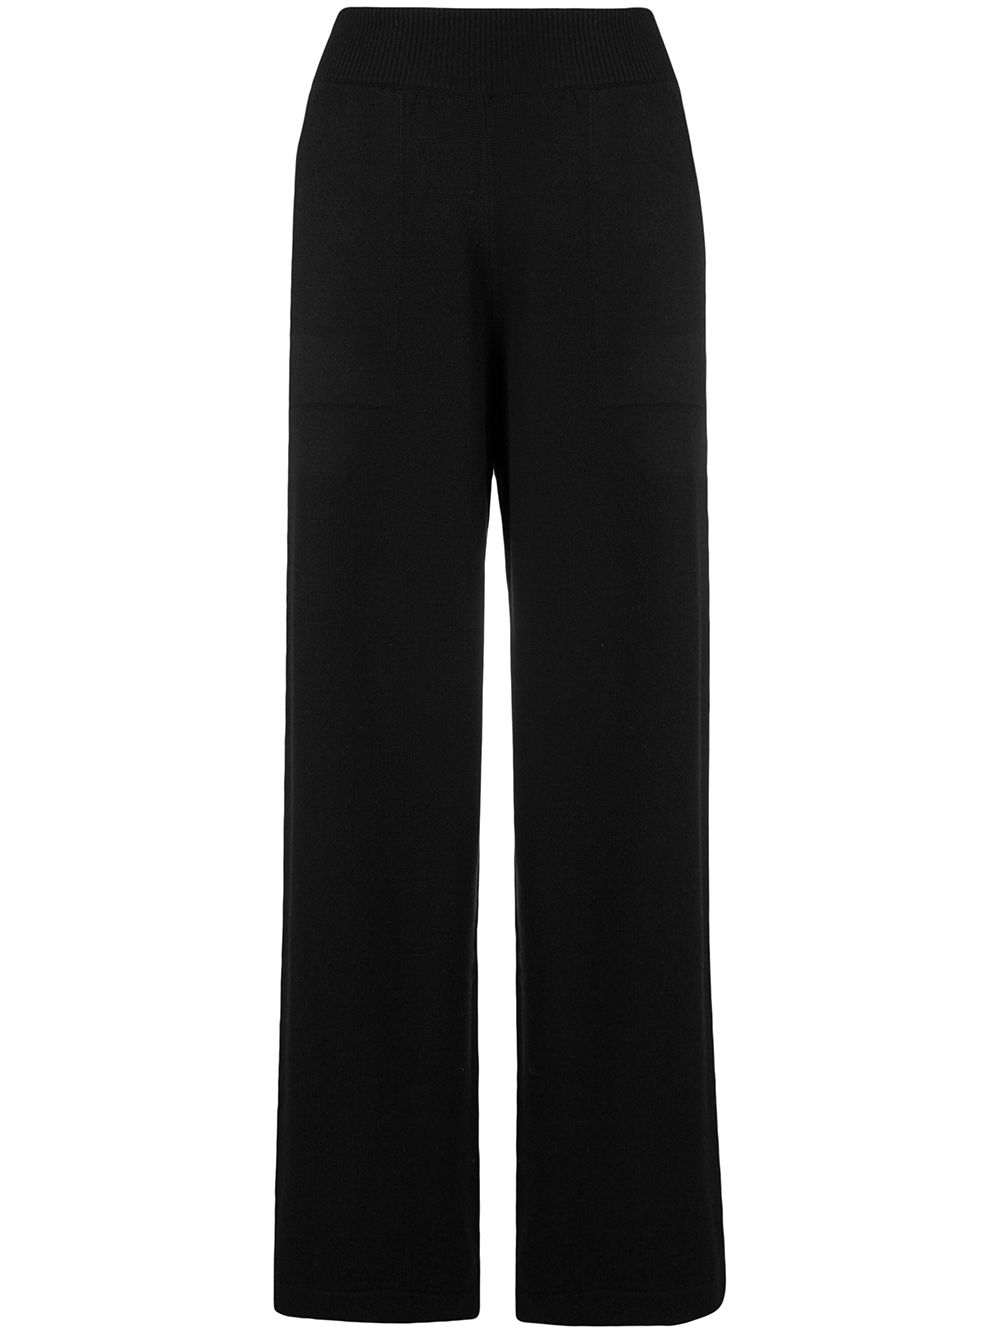 Barrie ribbed waistband trousers - Black von Barrie